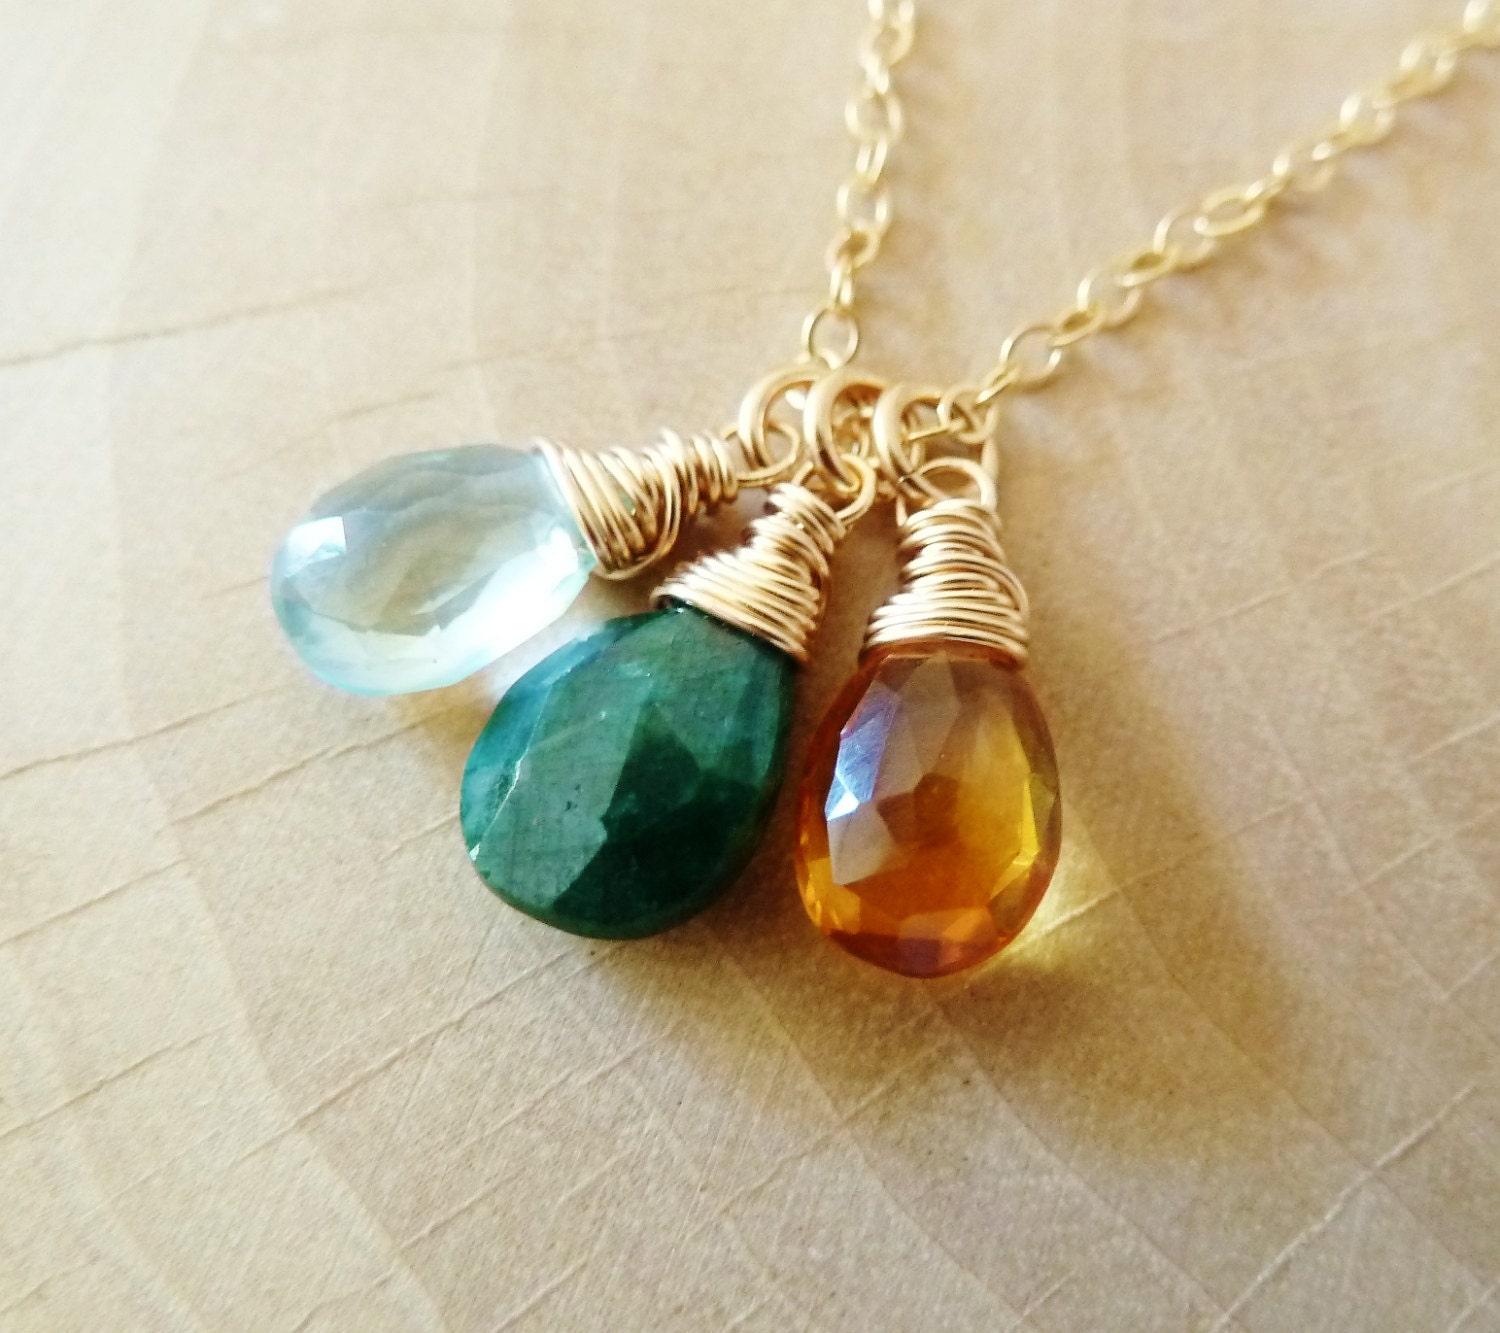 Any 3 Birthstone necklace. Gold or Silver. Personalized.